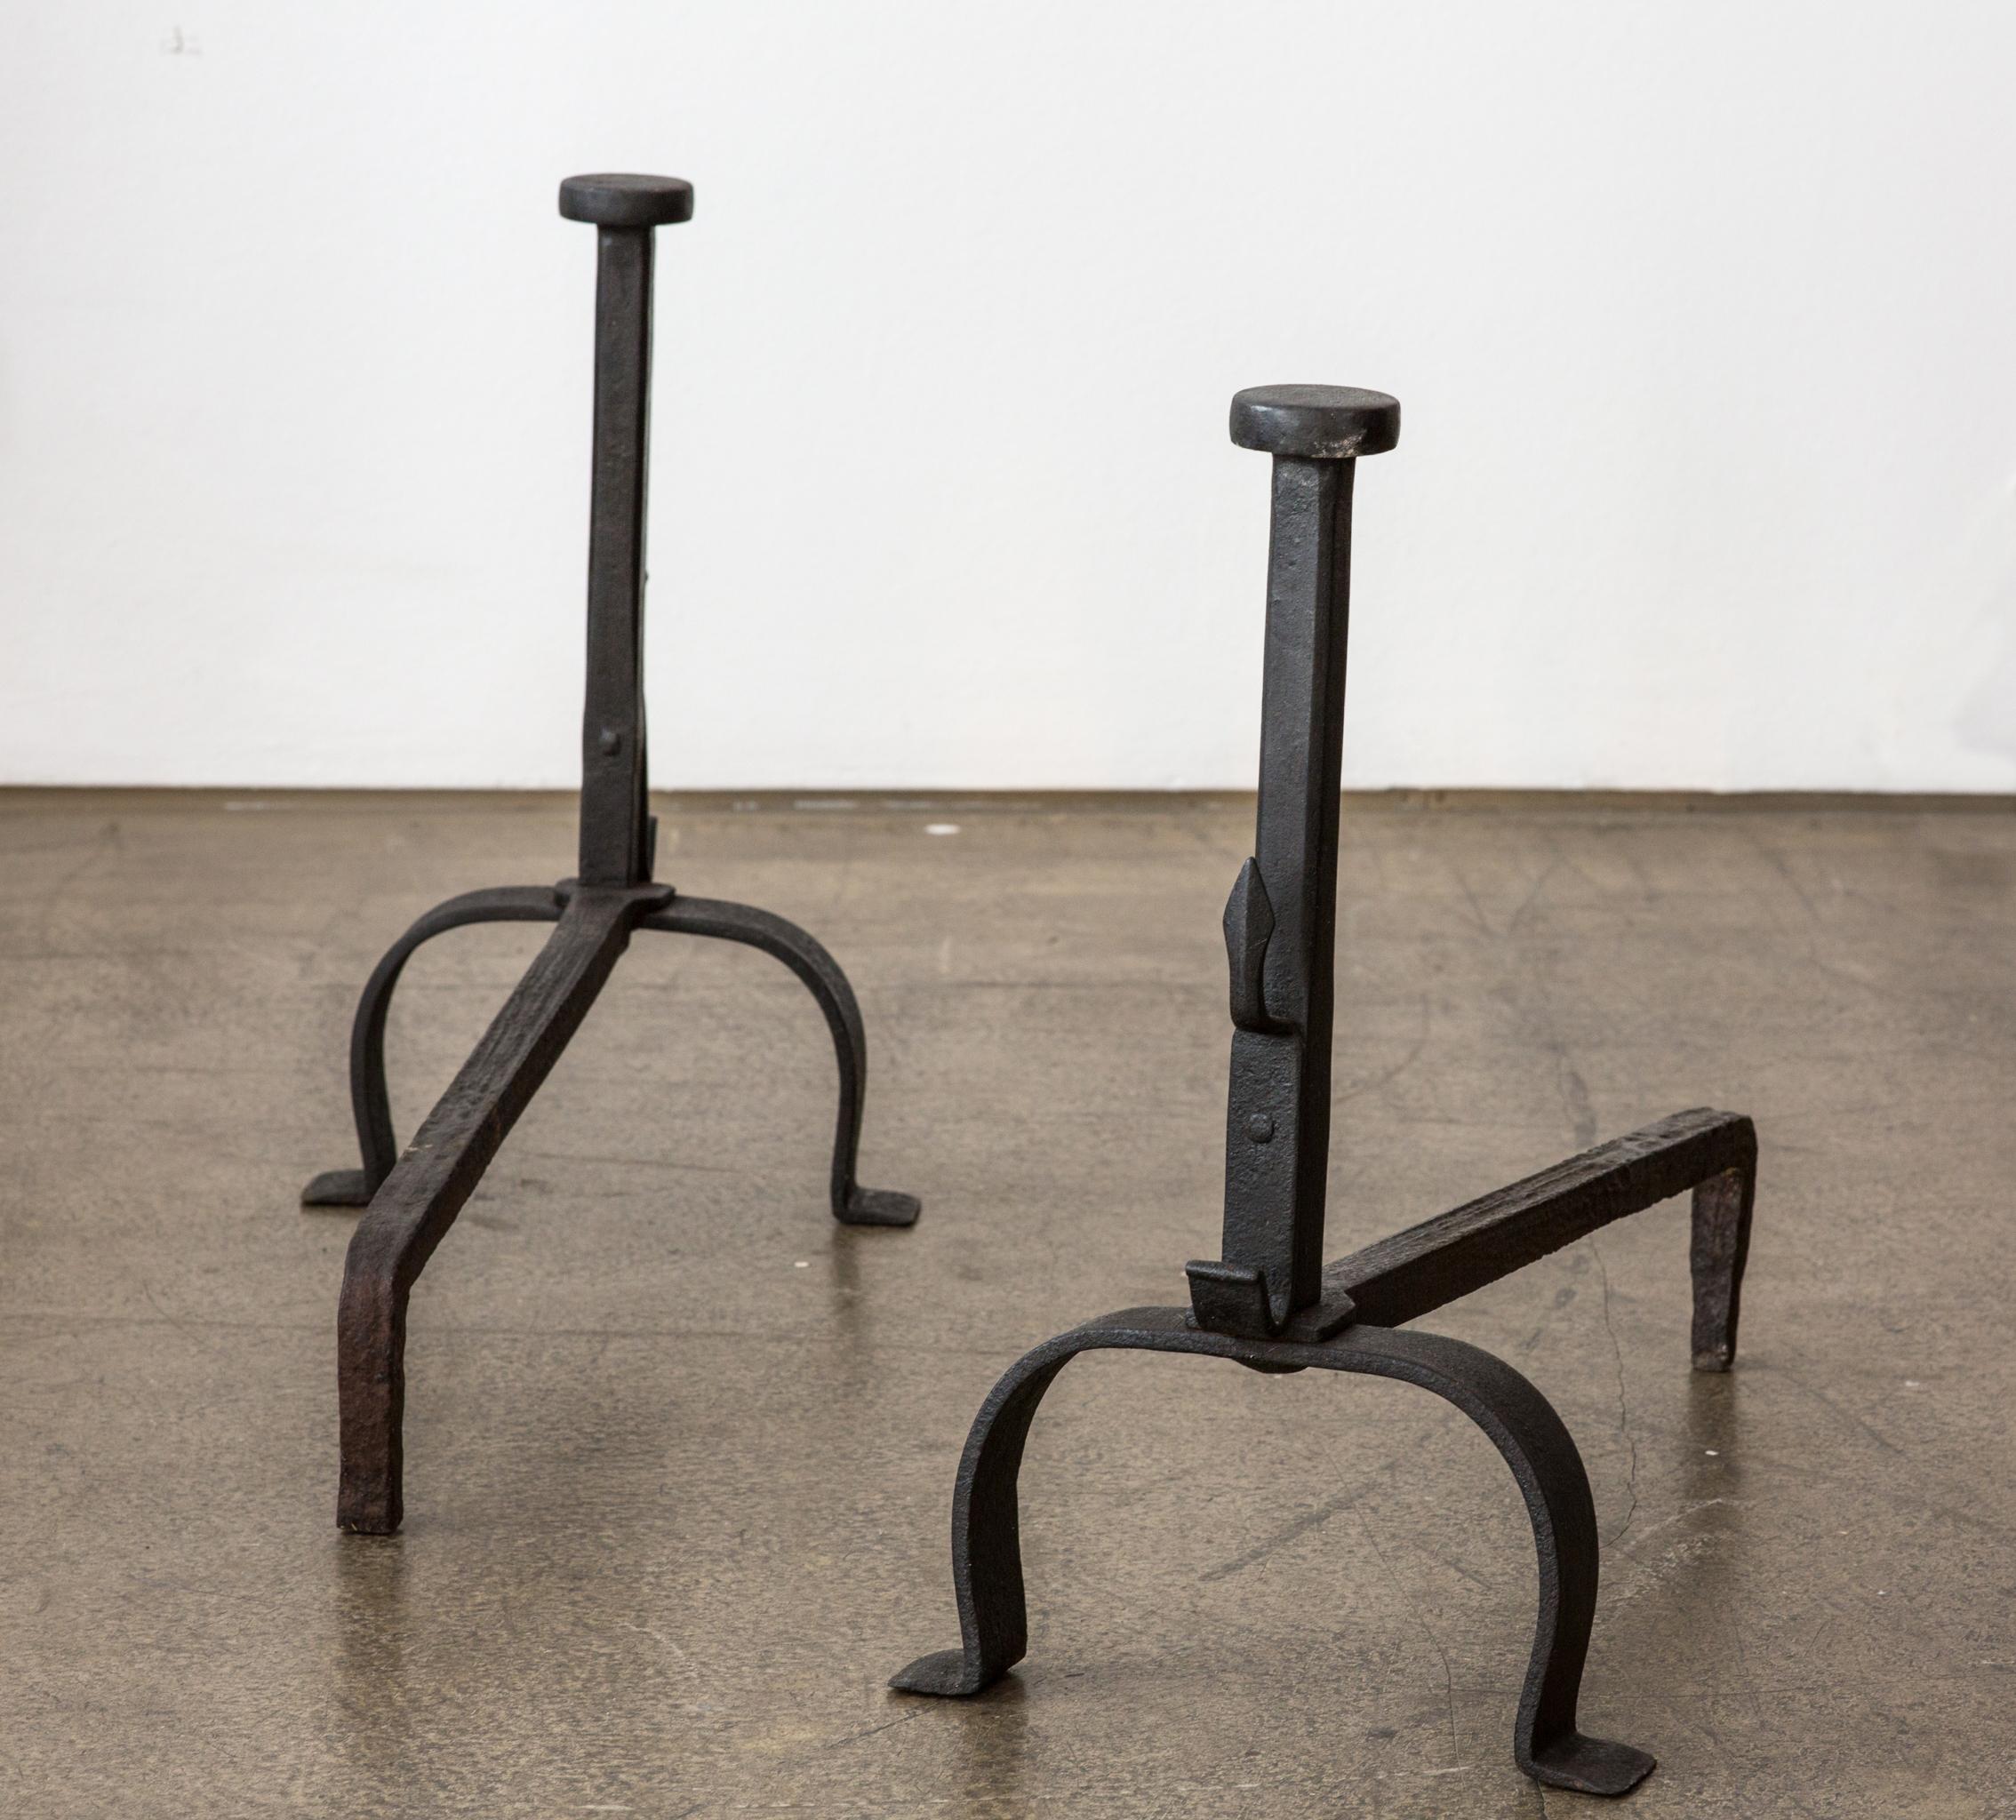 A very decorative pair of antique black wrought iron fireplace andirons. The iron andirons are from Italy and were made at the 19th Century. 

The andirons have two feet in front and one single feed at the back. The front feeds are connected with a